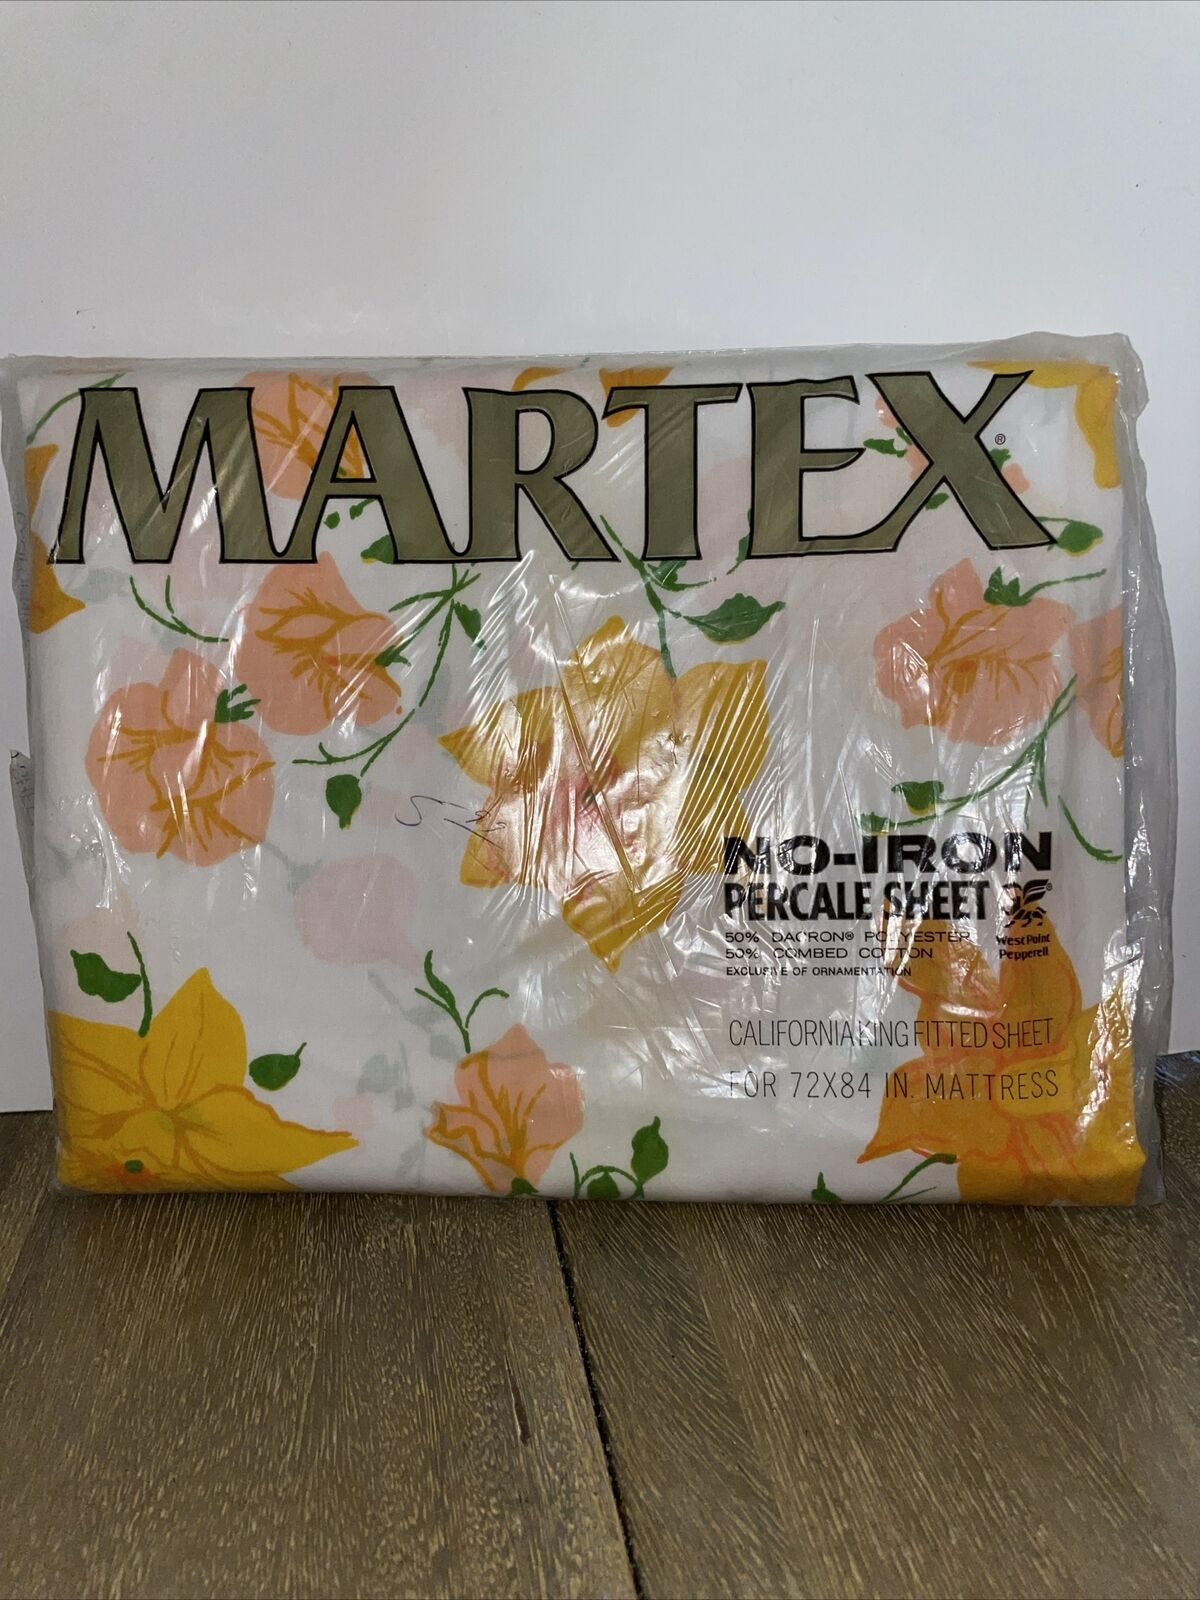 Vintage Martex California King fitted sheet no iron percale